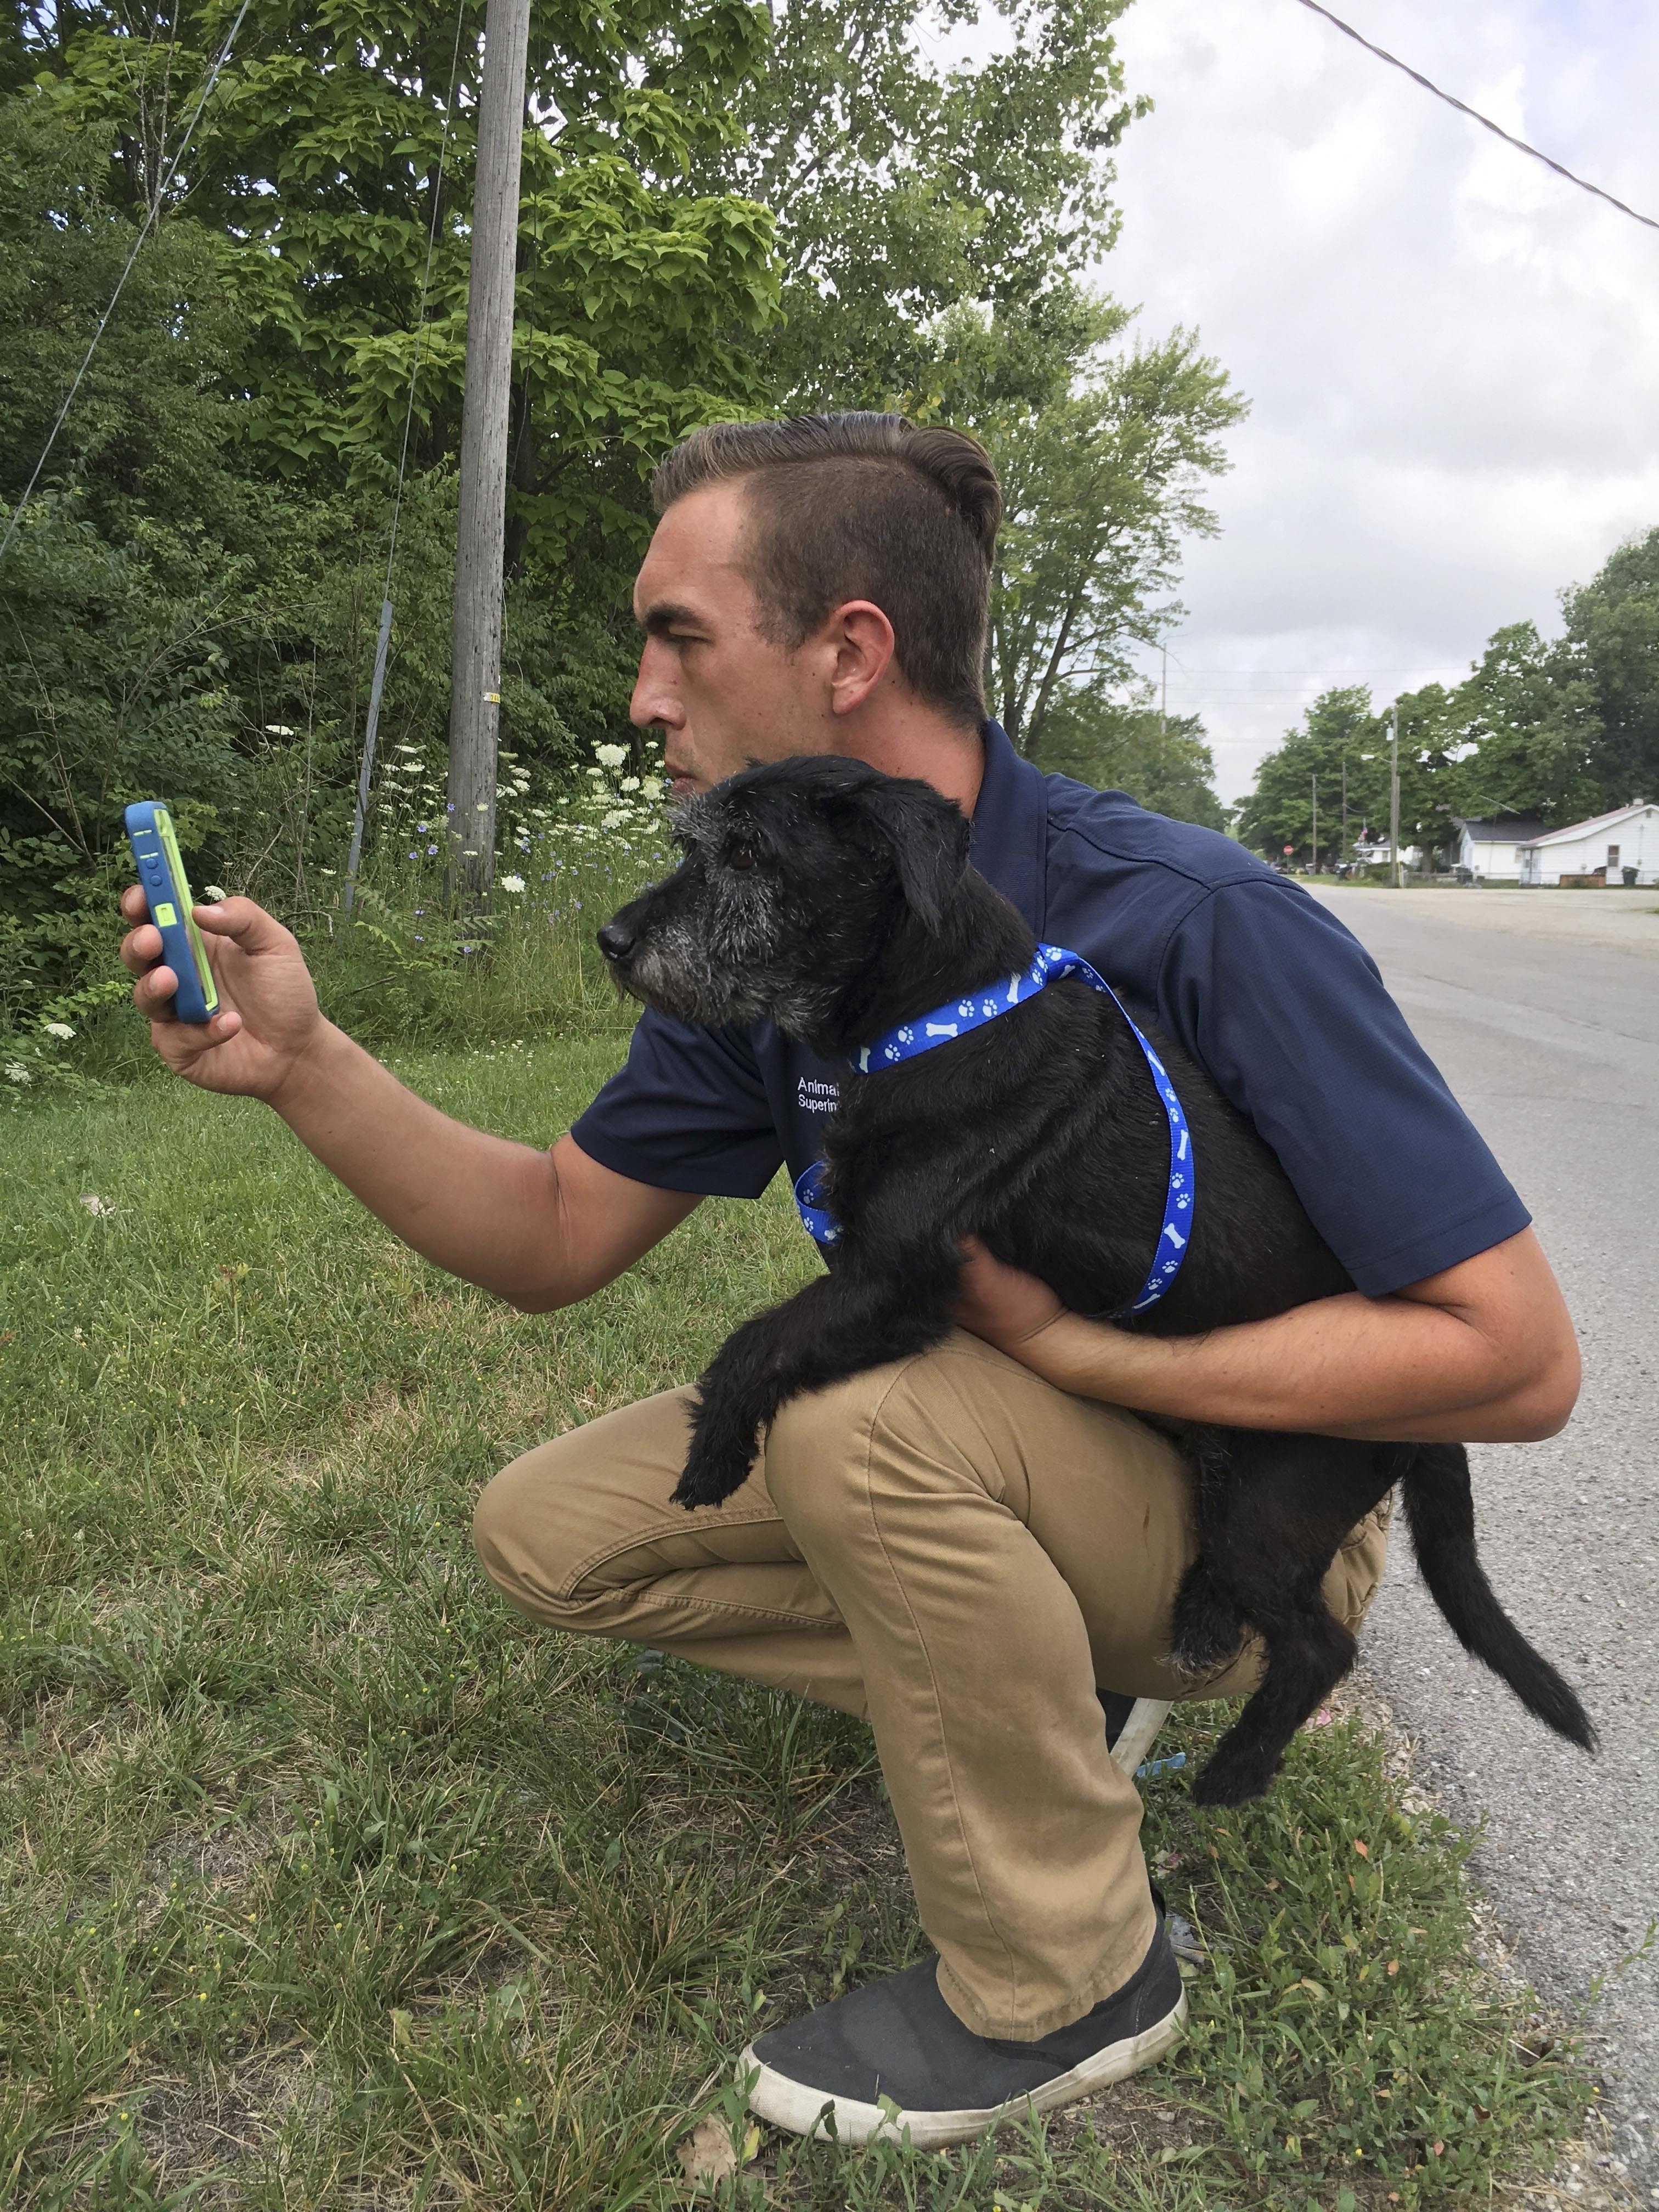 In this Wednesday, July 13, 2016, photo, provided by the Muncie Animal Shelter in Muncie, Ind., shelter superintendent Phil Peckinpaugh holds a terrier mix as he plays “Pokemon Go” in Muncie, Ind. Peckinpaugh came up with the idea of asking "Pokemon Go" players to walk an adoptable dog as they wander the streets of the eastern Indiana city doing battle with digital monsters on their smartphones. (Phil Peckinpaugh/Muncie Animal Shelter via AP)